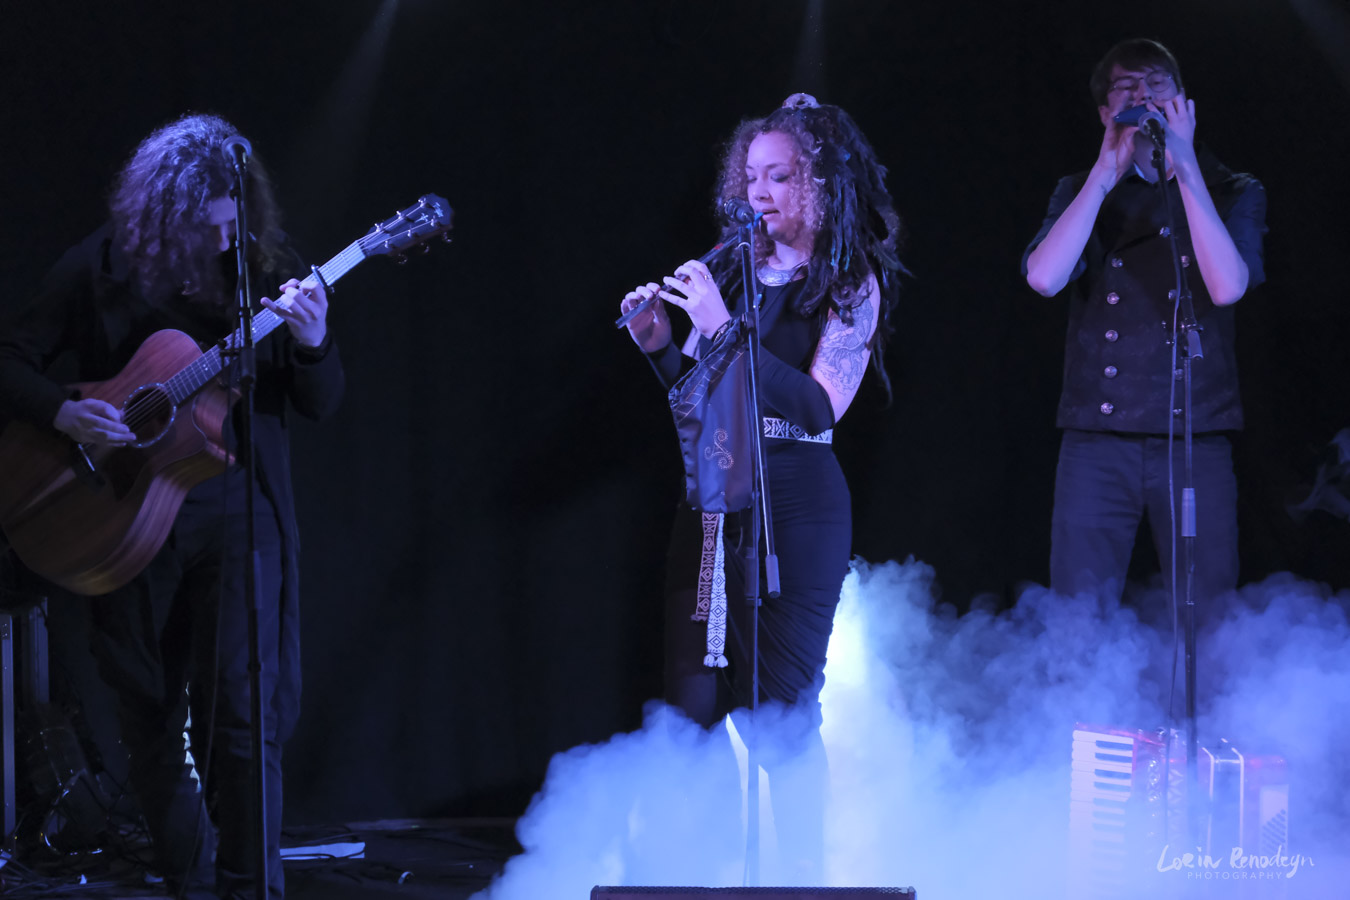 Photo of 3 muscicians performing against a black background with blue light on them. Smoke is coming in from the lower right to the middle of the image.